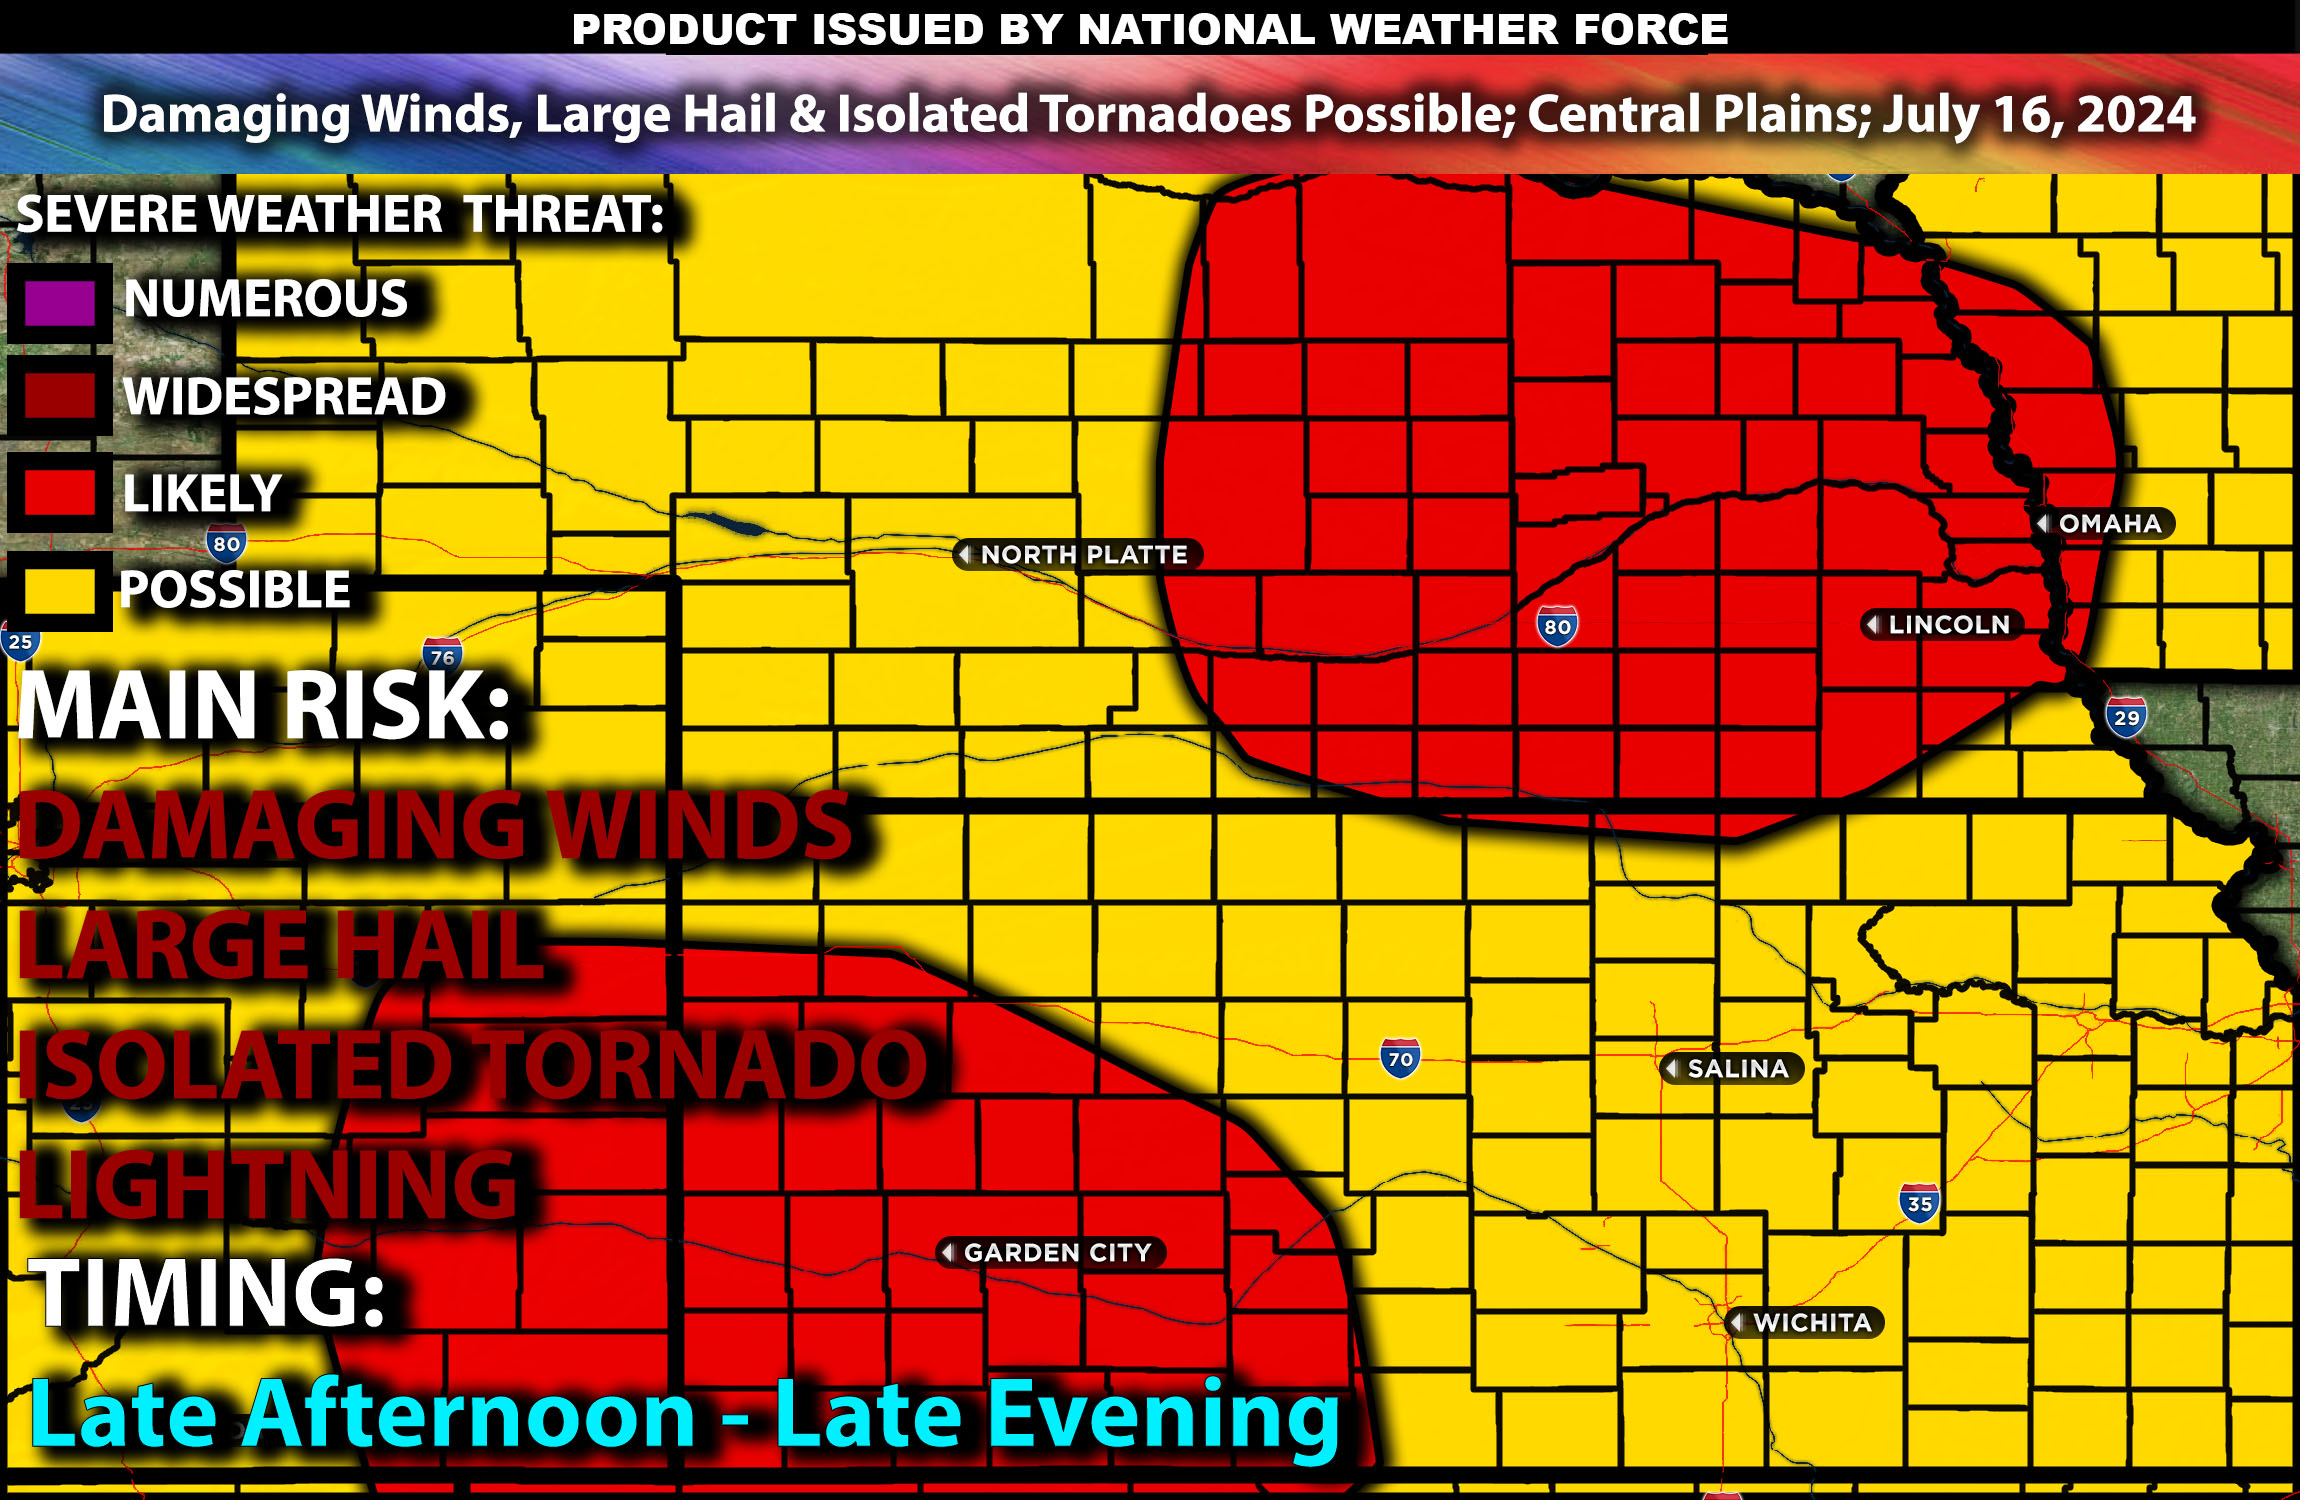 Damaging Winds, Large Hail & Isolated Tornadoes Possible; Central Plains; July 16, 2024